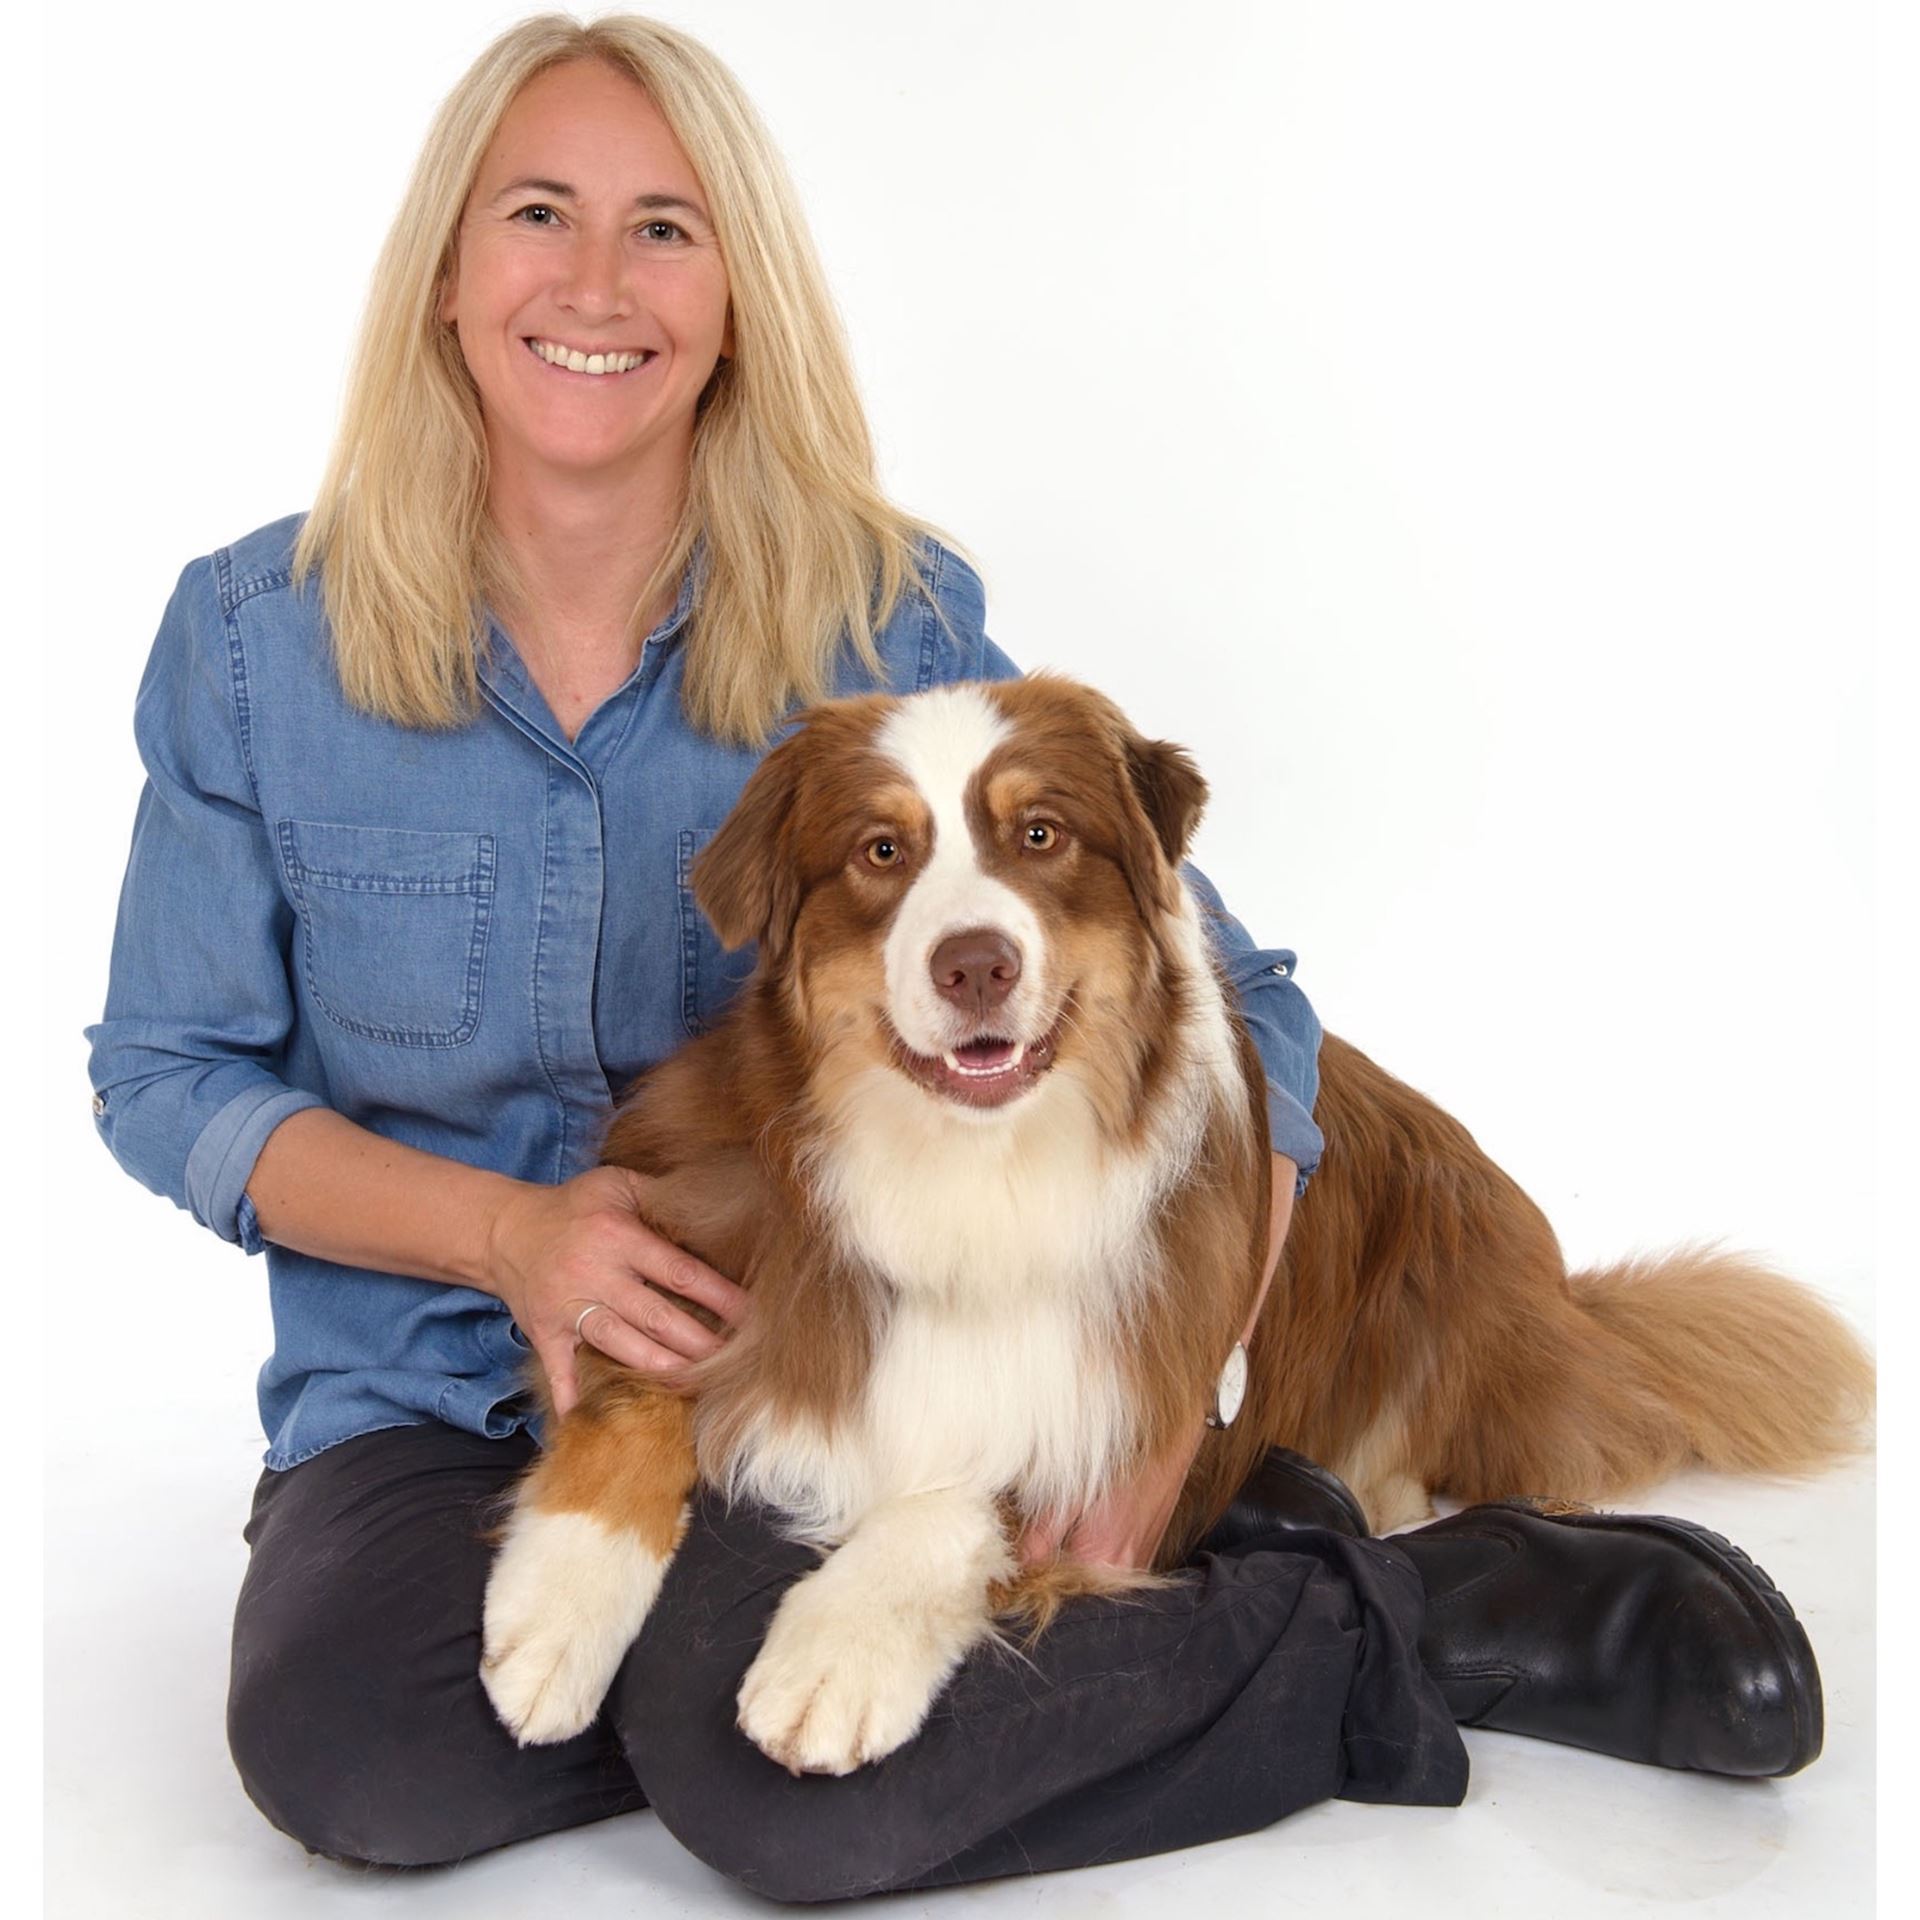 Alexis Davison and her dog Arlo look at the camera while in relaxed poses. Alexis has blond hair and is wearing a blue shirt and pants. Arlo is a trie coloured Australian Shepard